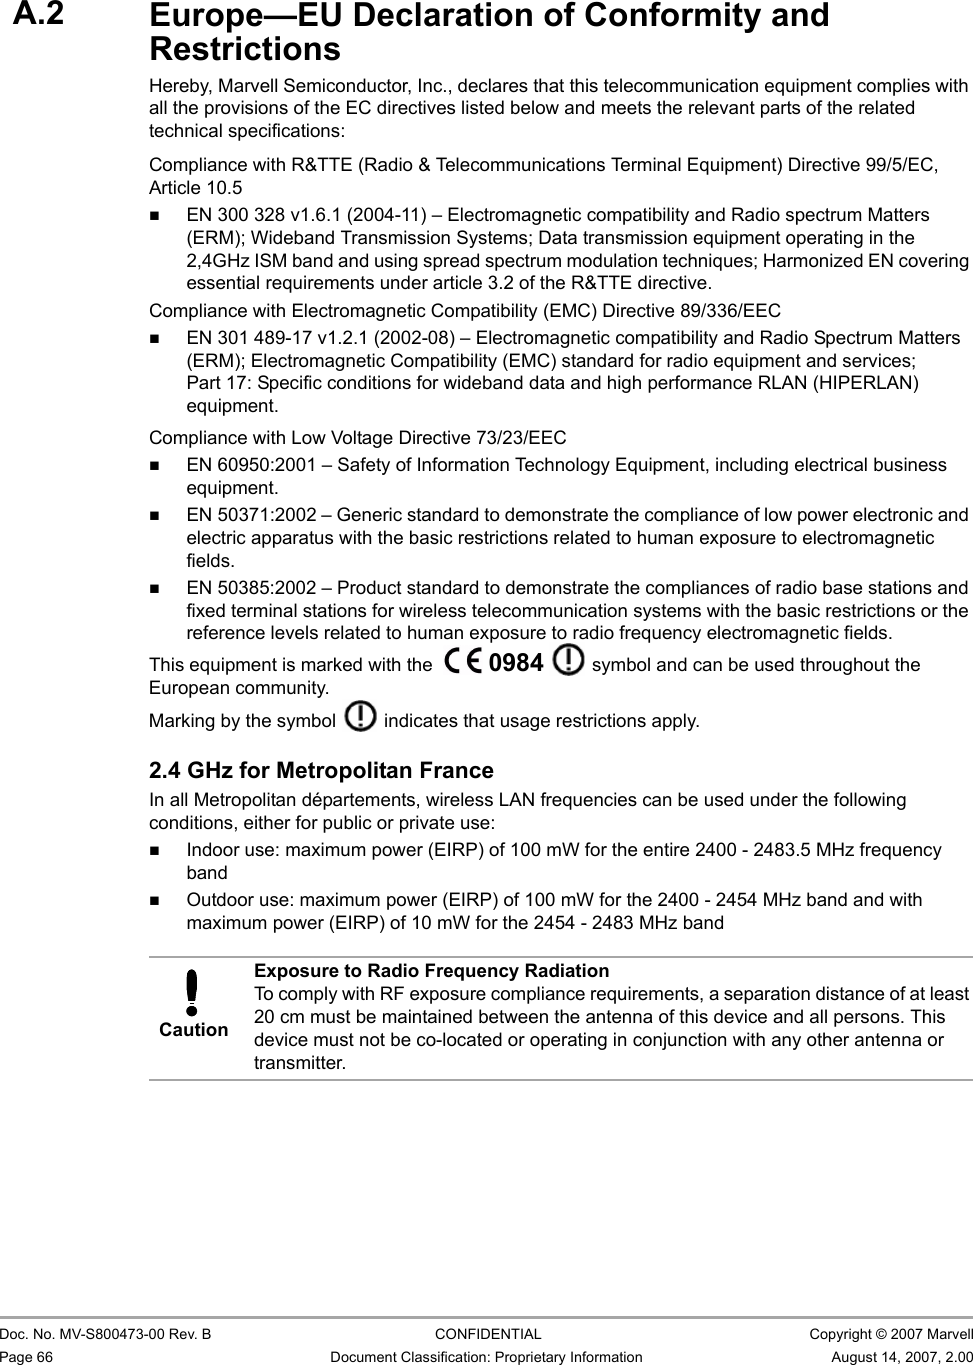 CB-82/MB-82/EC-82/MC-82 User Guide                                                  Doc. No. MV-S800473-00 Rev. B  CONFIDENTIAL  Copyright © 2007 MarvellPage 66 Document Classification: Proprietary Information August 14, 2007, 2.00 A.3 Europe—EU Declaration of Conformity and RestrictionsHereby, Marvell Semiconductor, Inc., declares that this telecommunication equipment complies with all the provisions of the EC directives listed below and meets the relevant parts of the related technical specifications:Compliance with R&amp;TTE (Radio &amp; Telecommunications Terminal Equipment) Directive 99/5/EC, Article 10.5EN 300 328 v1.6.1 (2004-11) – Electromagnetic compatibility and Radio spectrum Matters (ERM); Wideband Transmission Systems; Data transmission equipment operating in the 2,4GHz ISM band and using spread spectrum modulation techniques; Harmonized EN covering essential requirements under article 3.2 of the R&amp;TTE directive.Compliance with Electromagnetic Compatibility (EMC) Directive 89/336/EECEN 301 489-17 v1.2.1 (2002-08) – Electromagnetic compatibility and Radio Spectrum Matters (ERM); Electromagnetic Compatibility (EMC) standard for radio equipment and services; Part 17: Specific conditions for wideband data and high performance RLAN (HIPERLAN) equipment.Compliance with Low Voltage Directive 73/23/EEC EN 60950:2001 – Safety of Information Technology Equipment, including electrical business equipment.EN 50371:2002 – Generic standard to demonstrate the compliance of low power electronic and electric apparatus with the basic restrictions related to human exposure to electromagnetic fields.EN 50385:2002 – Product standard to demonstrate the compliances of radio base stations and fixed terminal stations for wireless telecommunication systems with the basic restrictions or the reference levels related to human exposure to radio frequency electromagnetic fields.                         This equipment is marked with the   0984   symbol and can be used throughout the European community. Marking by the symbol   indicates that usage restrictions apply.2.4 GHz for Metropolitan FranceIn all Metropolitan départements, wireless LAN frequencies can be used under the following conditions, either for public or private use:Indoor use: maximum power (EIRP) of 100 mW for the entire 2400 - 2483.5 MHz frequency bandOutdoor use: maximum power (EIRP) of 100 mW for the 2400 - 2454 MHz band and with maximum power (EIRP) of 10 mW for the 2454 - 2483 MHz band                         CautionExposure to Radio Frequency RadiationTo comply with RF exposure compliance requirements, a separation distance of at least 20 cm must be maintained between the antenna of this device and all persons. This device must not be co-located or operating in conjunction with any other antenna or transmitter.A.2